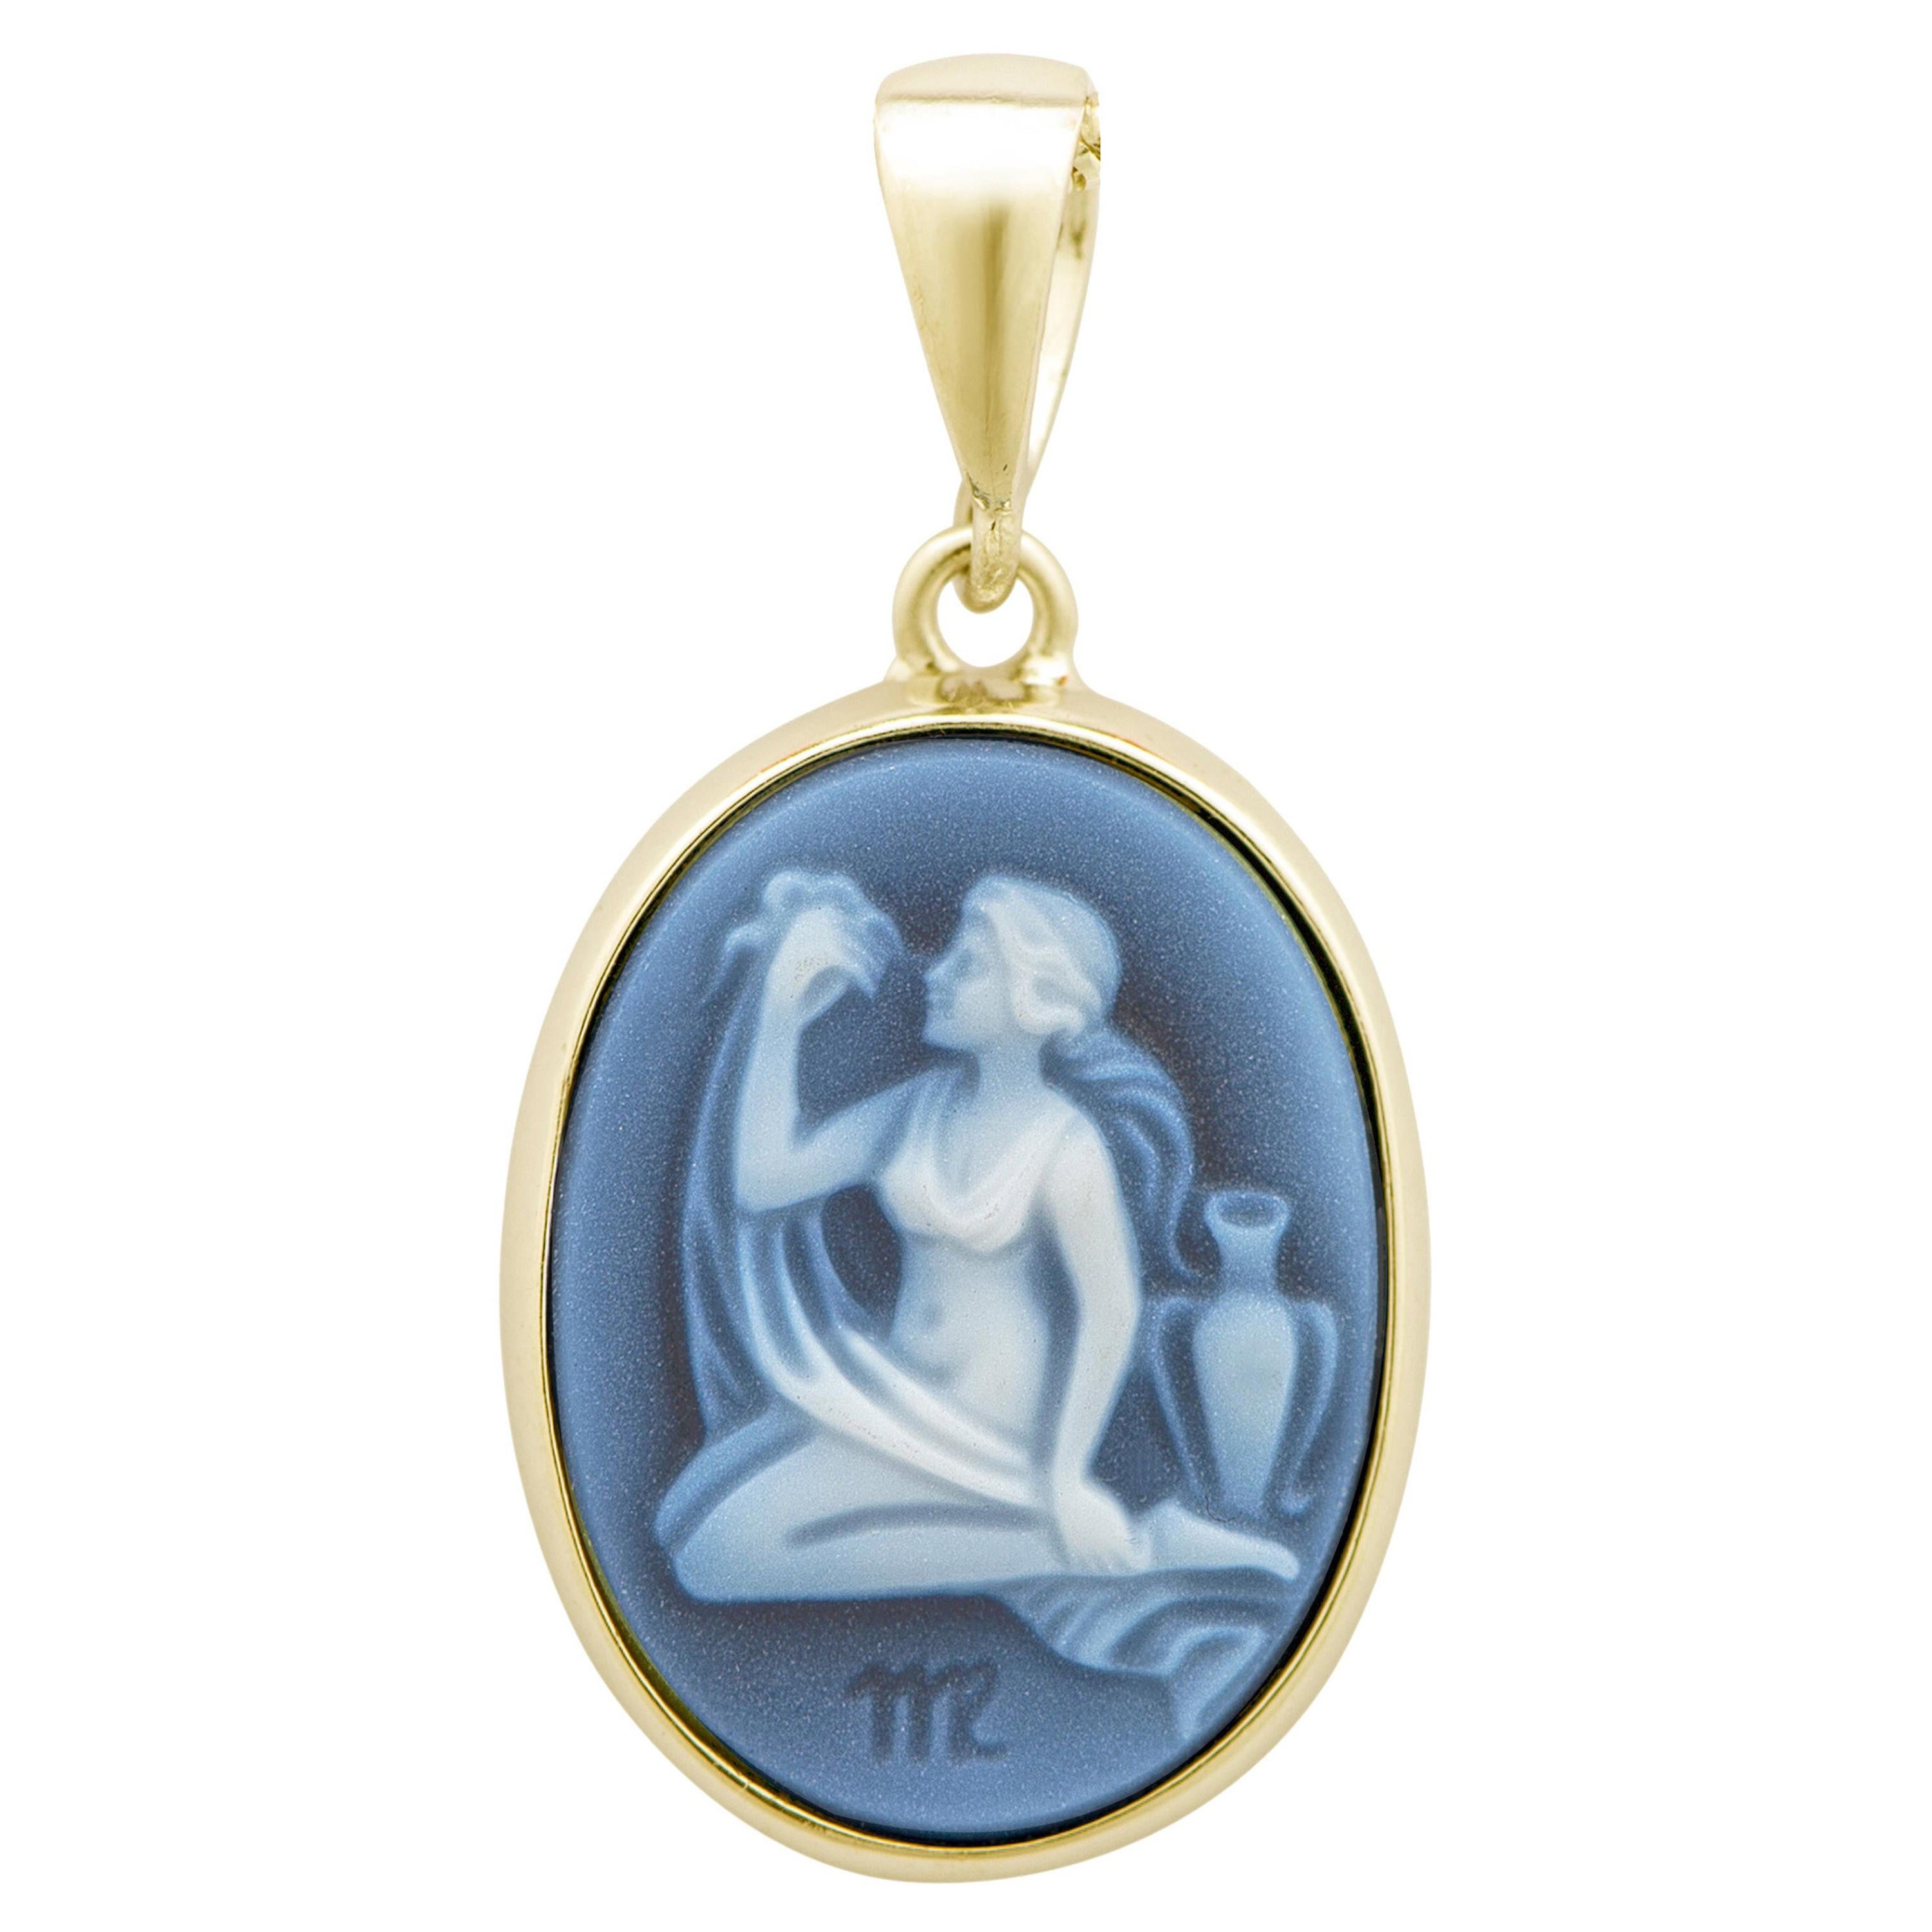 Hand-Carved Virgo Zodiac Agate Cameo 925 Sterling Silver Pendant Necklace